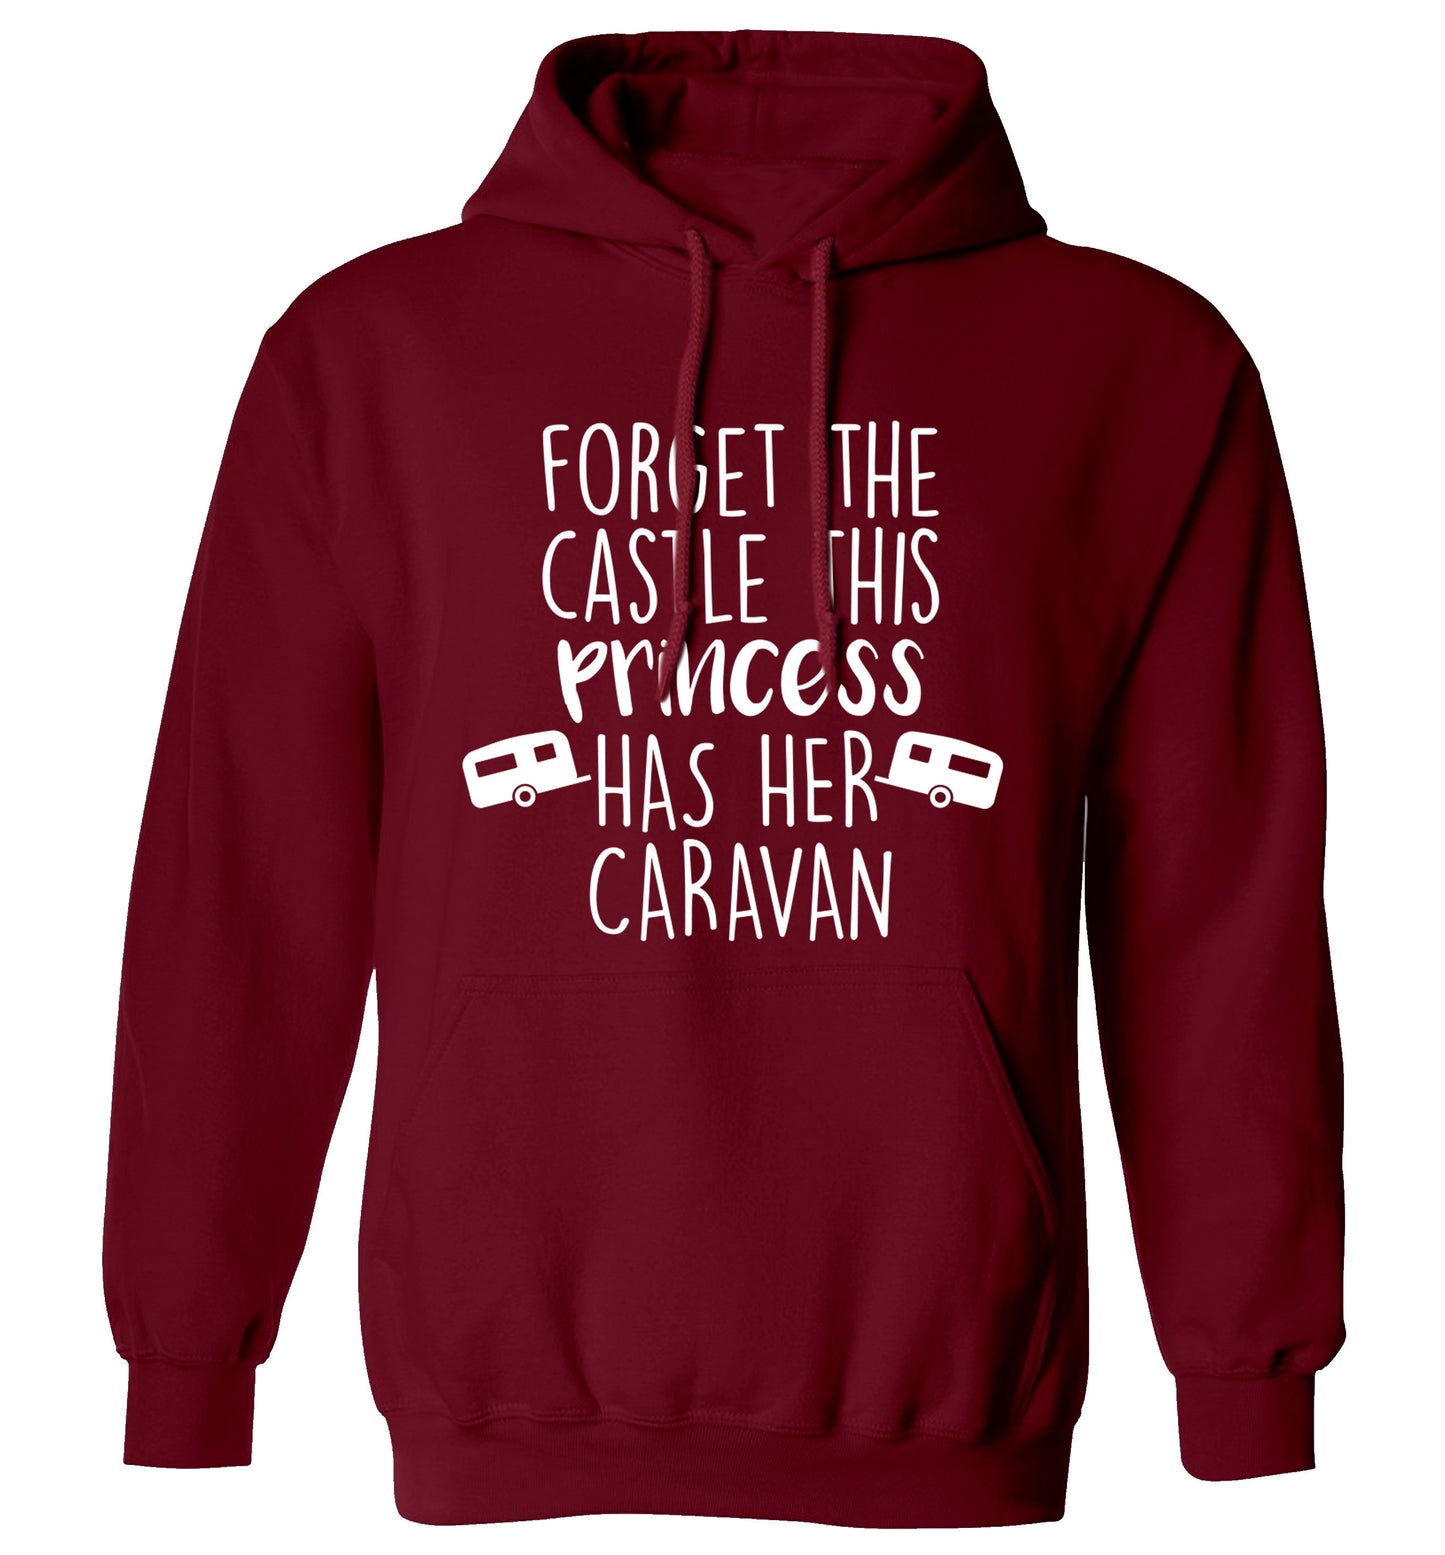 Forget the castle this princess lives at the caravan adults unisex maroon hoodie 2XL